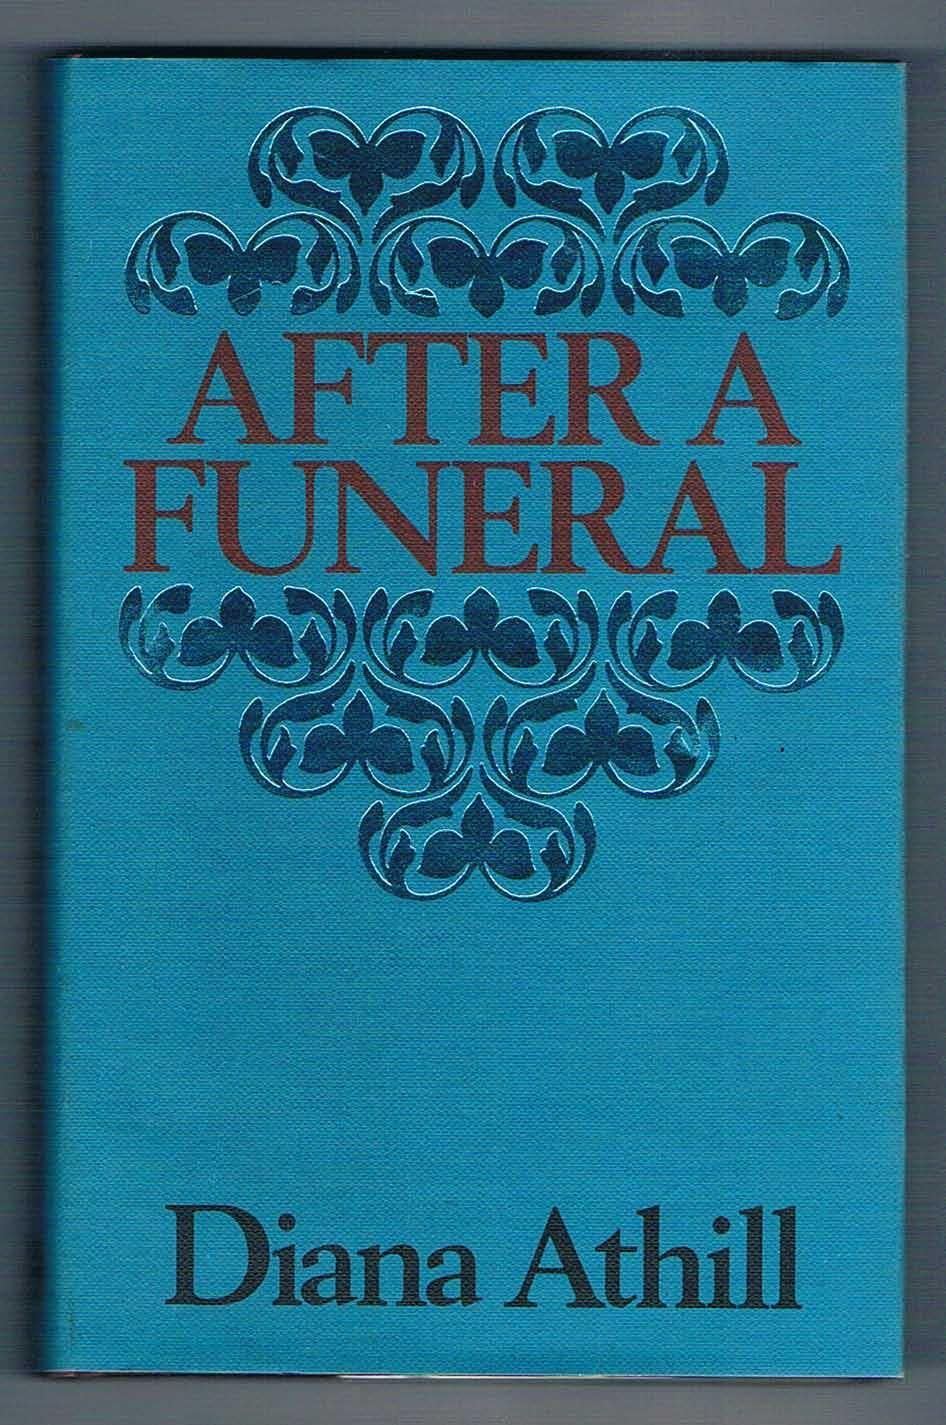 Flamingo reccomend Diana athill after a funeral